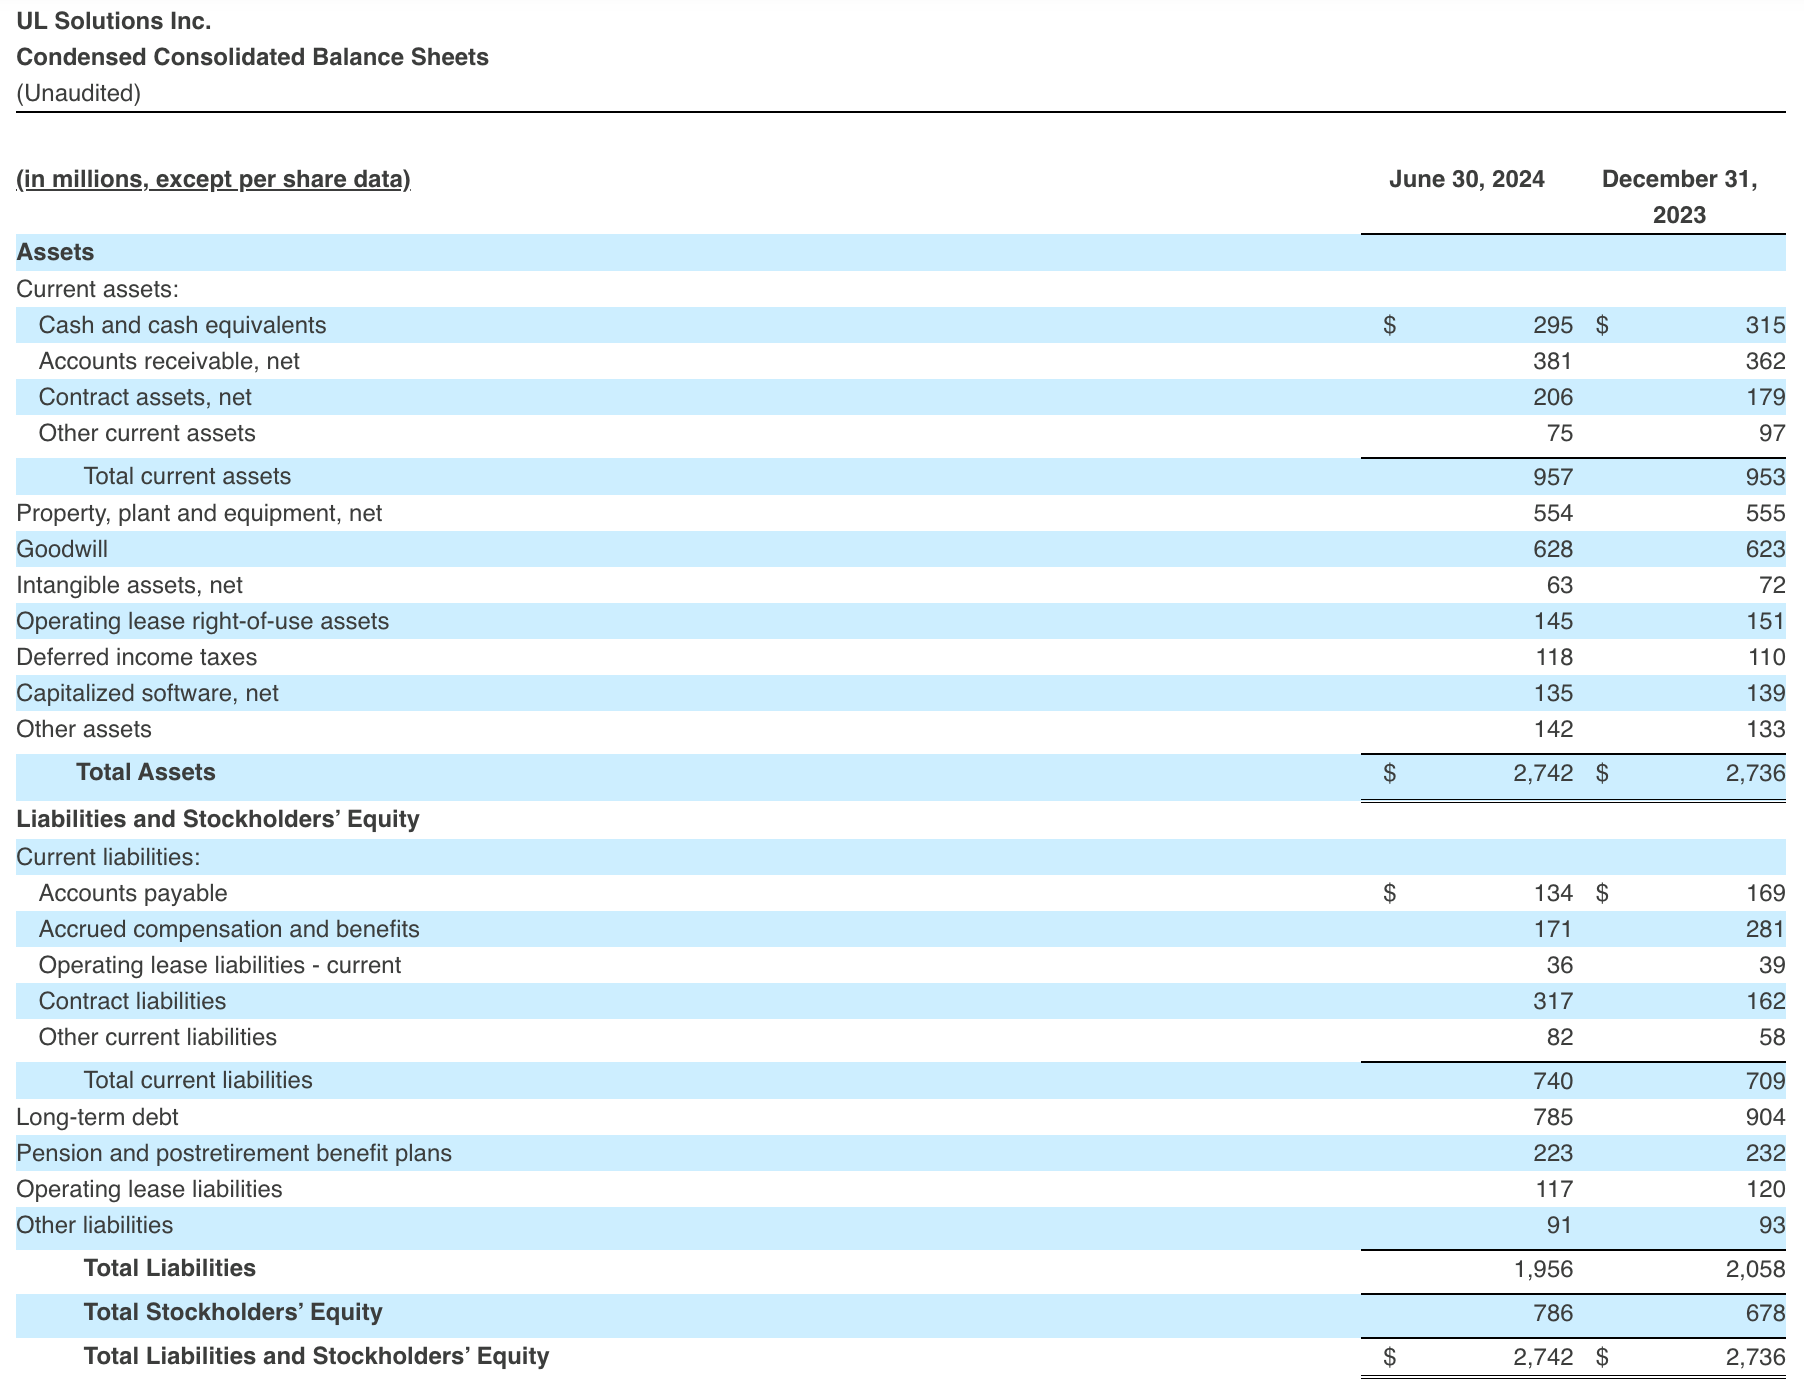 Condensed Consolidated Balance Sheets Q2 